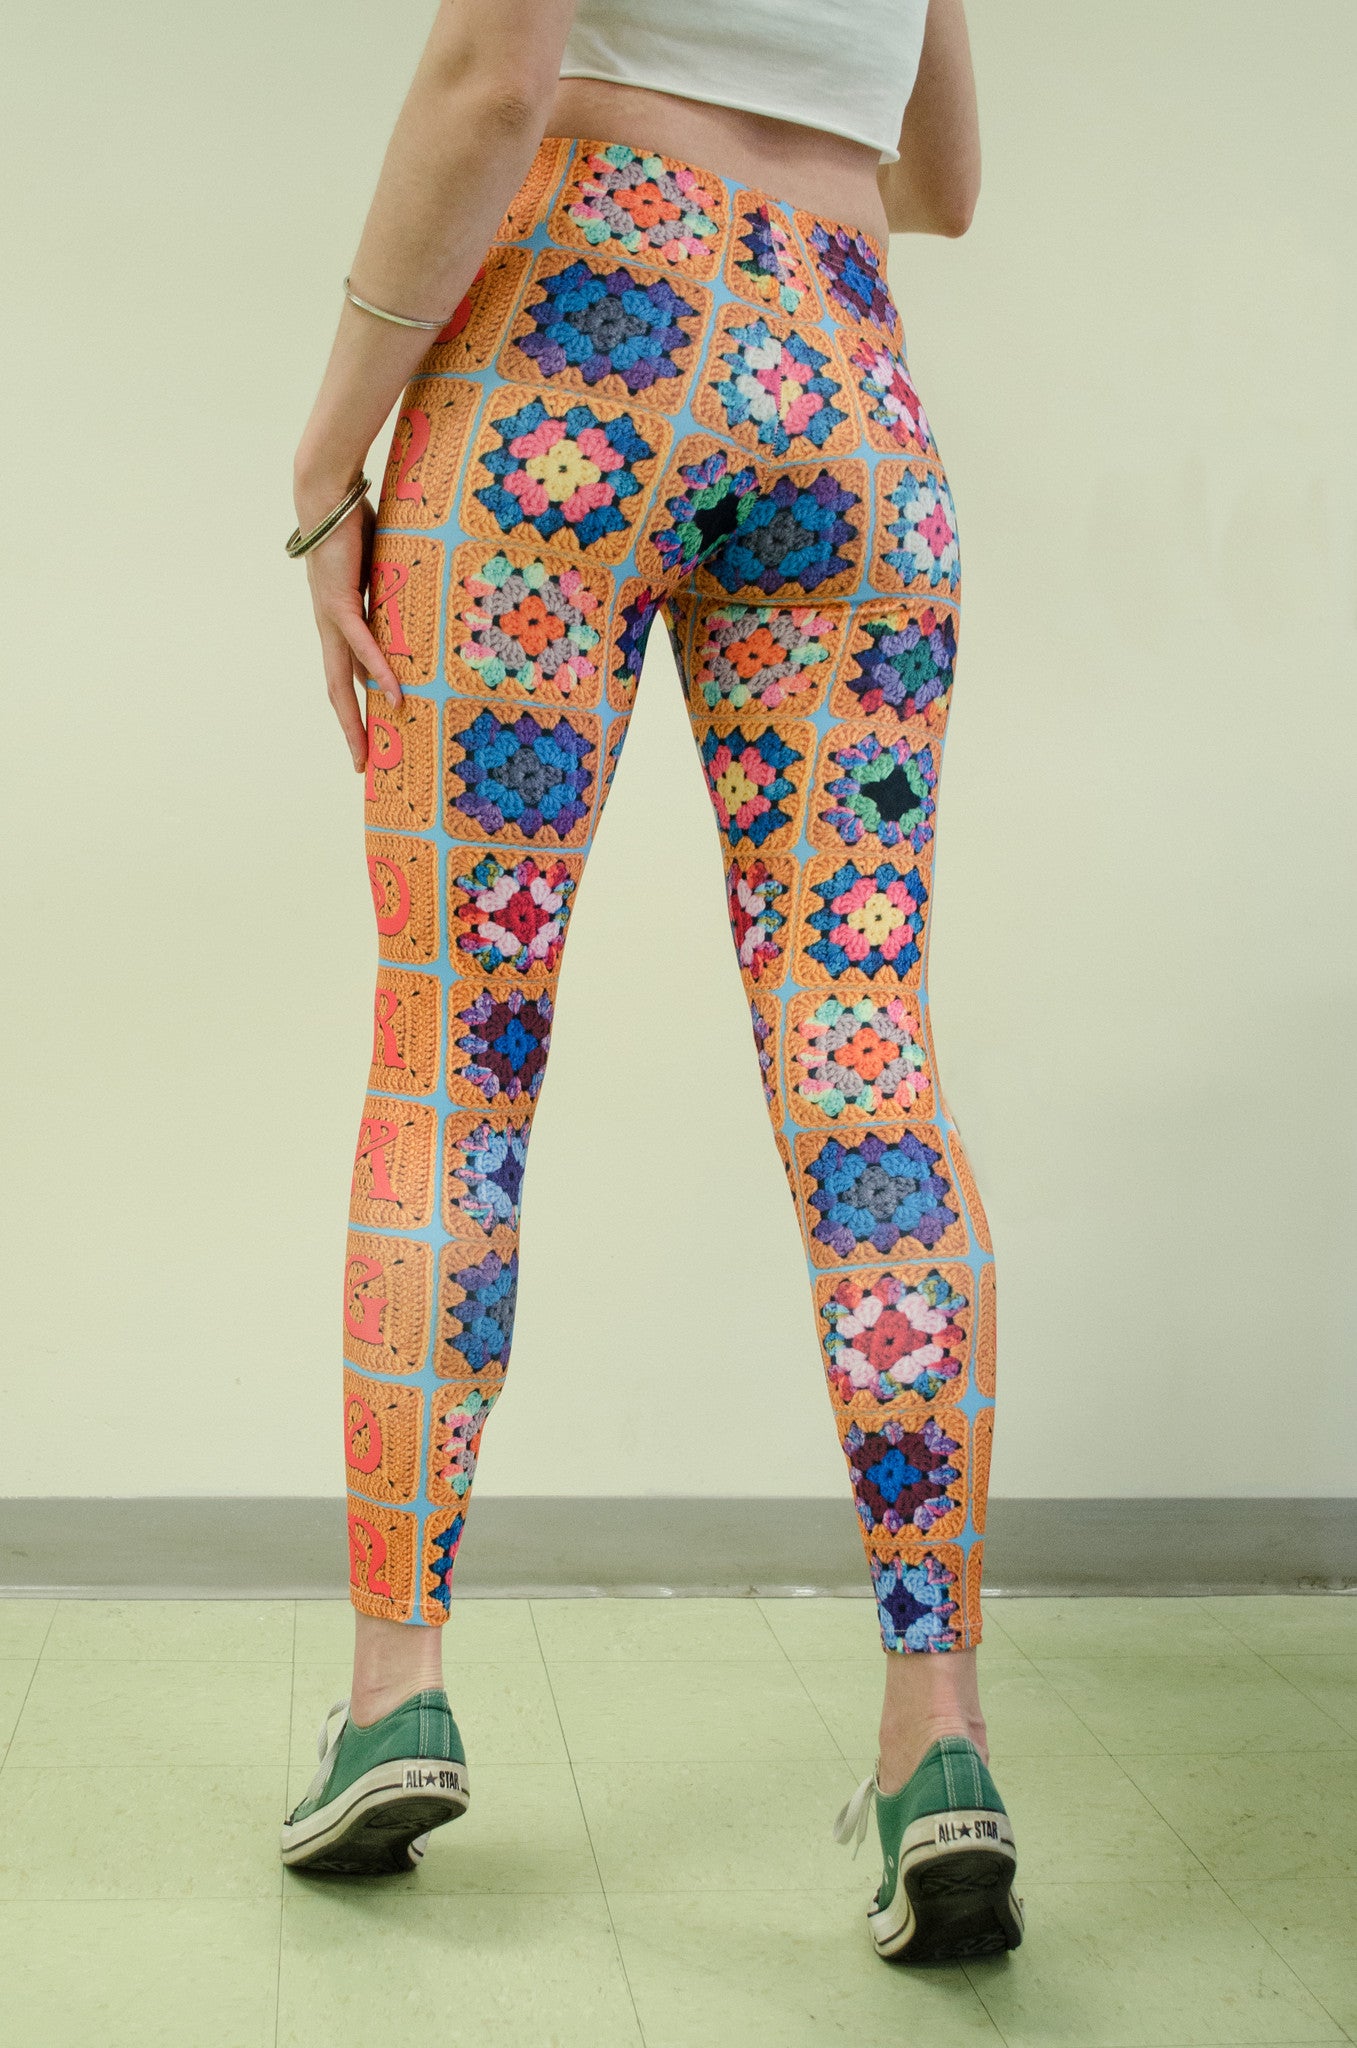 Snapdragon Brand Clothing Granny Square Crochet Print gold leggings in style Snappy features a 1970s vintage feel and a rainbow of colors. Made of comfortable spandex. 